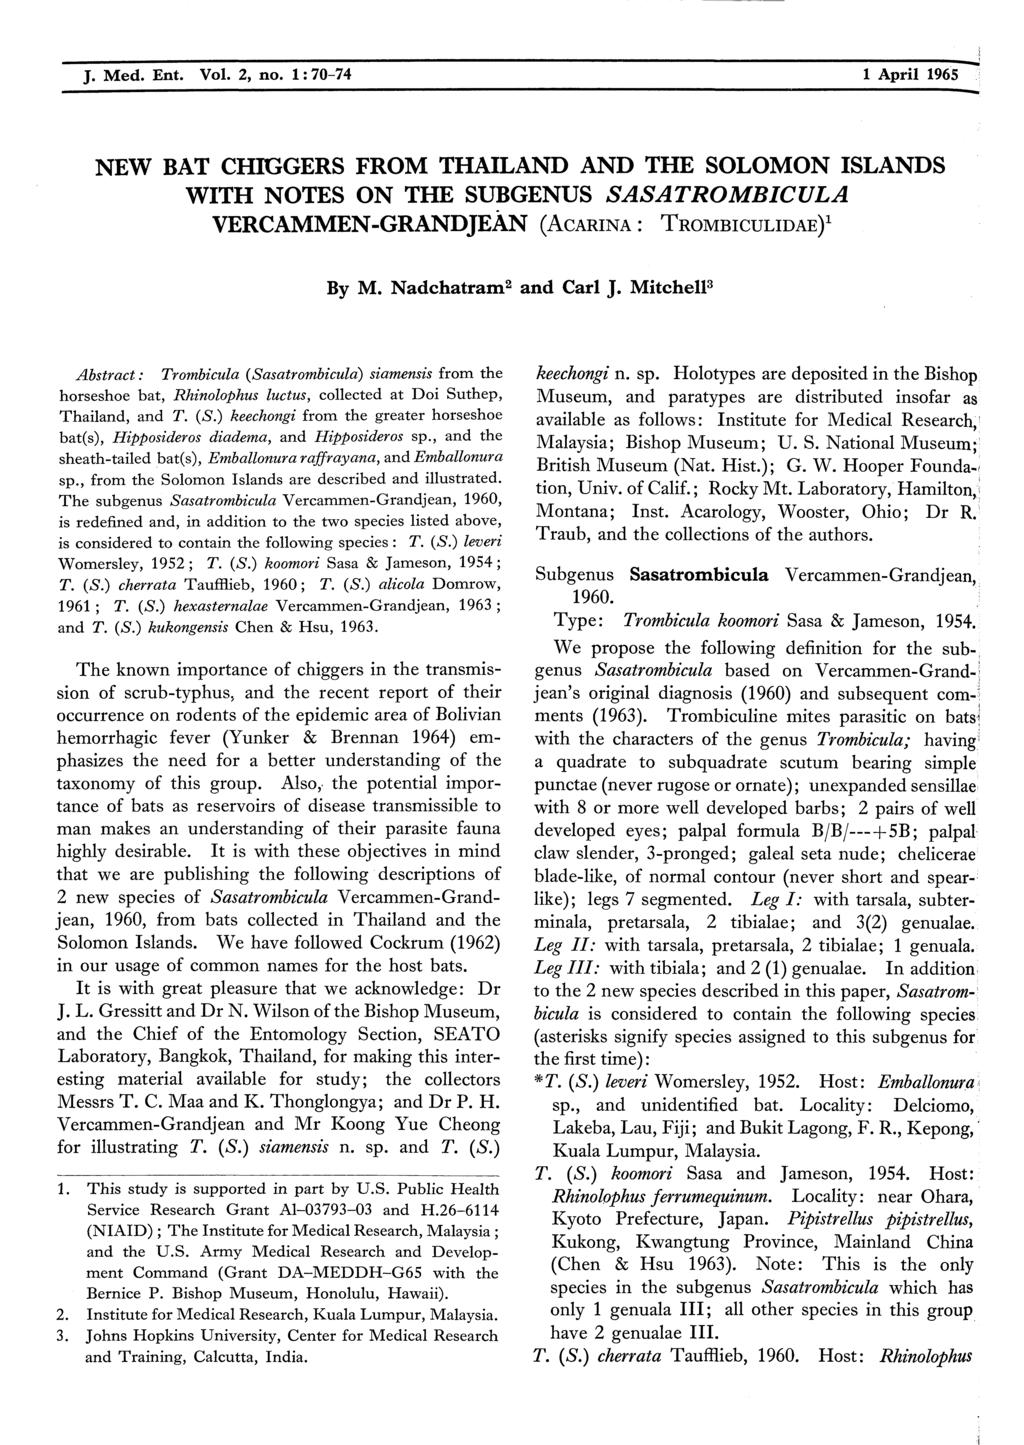 J. Med. Ent. Vol. 2, no. 1:70-74 1 April 1965 NEW BAT CHIGGERS FROM THAILAND AND THE SOLOMON ISLANDS WITH NOTES ON THE SUBGENUS SASATROMBICULA VERCAMMEN-GRANDJEAN (ACARINA: TROMBICULIDAE) 1 By M.